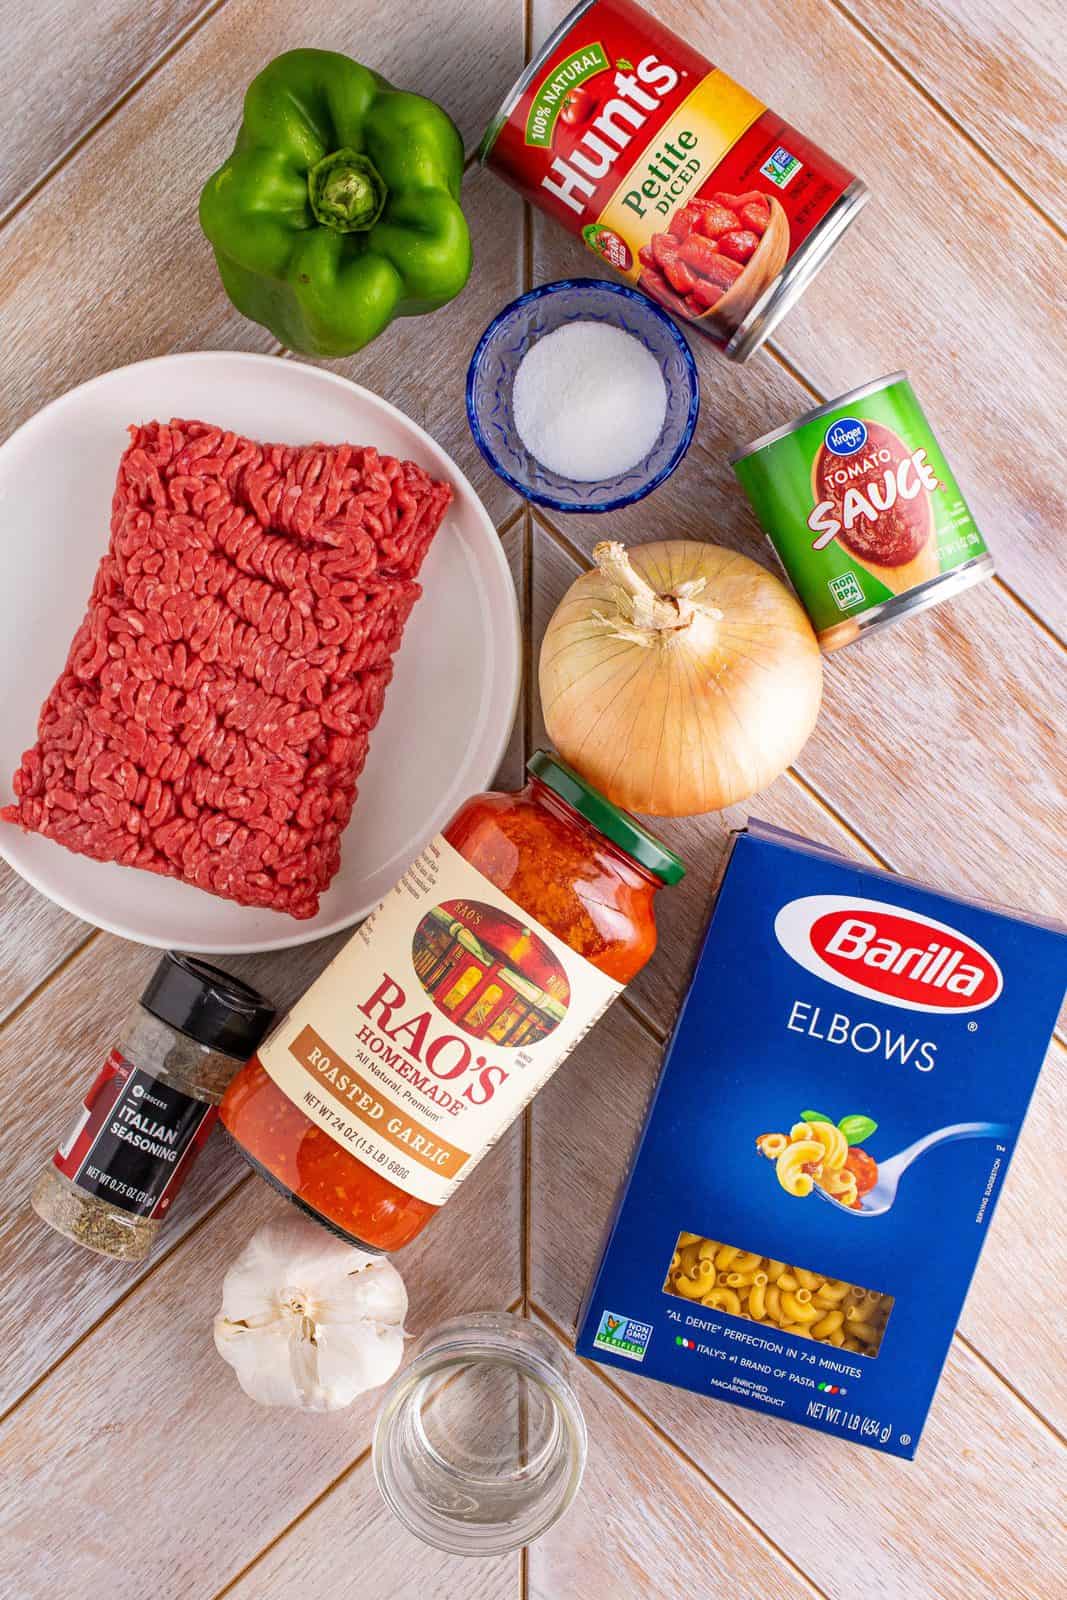 Ingredients needed: ground beef, onion, green pepper, garlic, pasta sauce, tomato sauce, petite diced tomatoes, water, italian seasoning, granulated sugar and macaroni noodles.